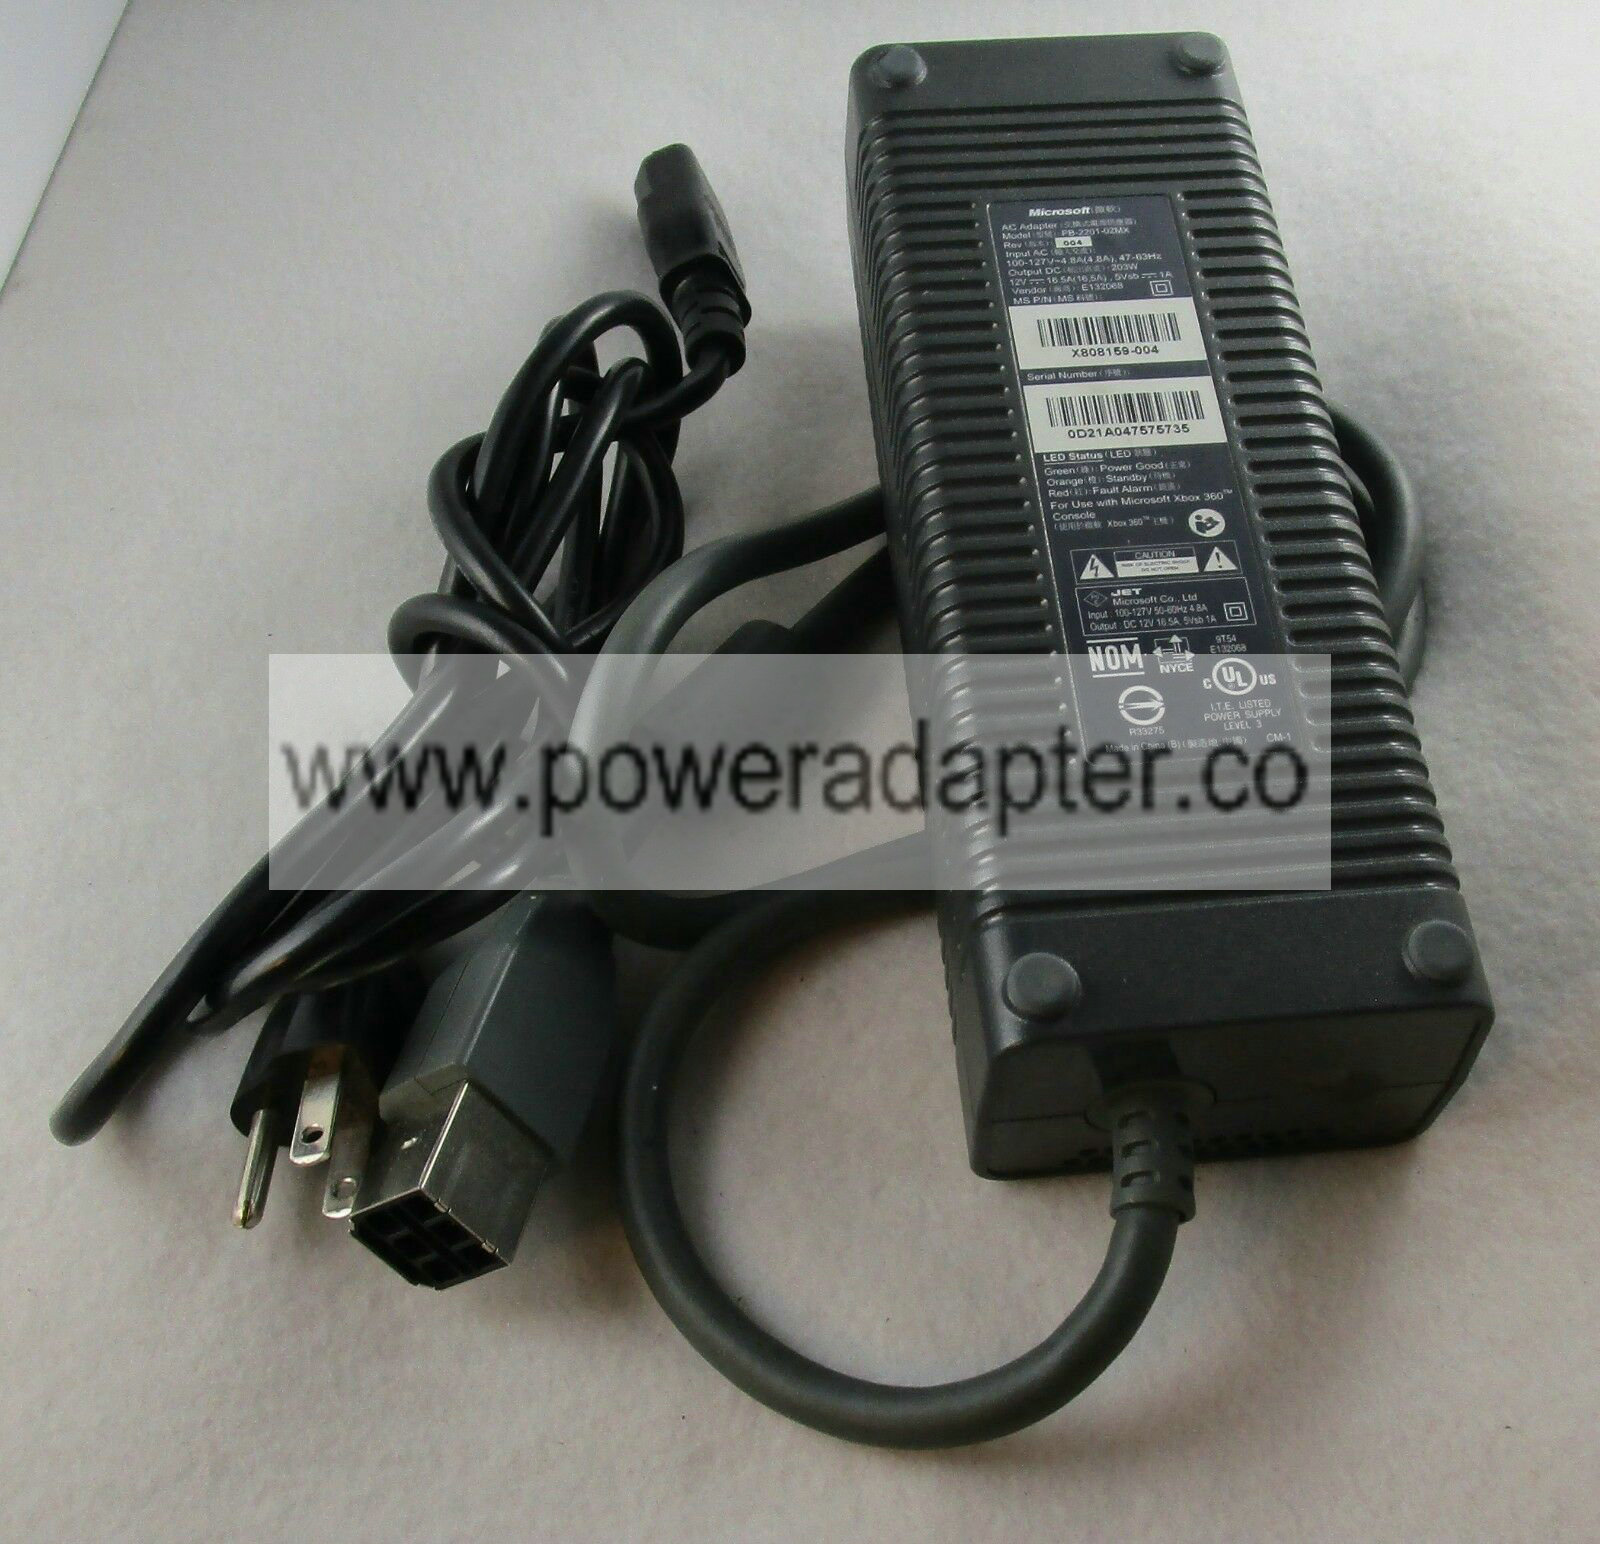 Official Genuine XBOX 360 Brick AC Power Adapter Cable PB-2201-02MX Type: Power Adapter Brand: Microsoft MPN: PB-2